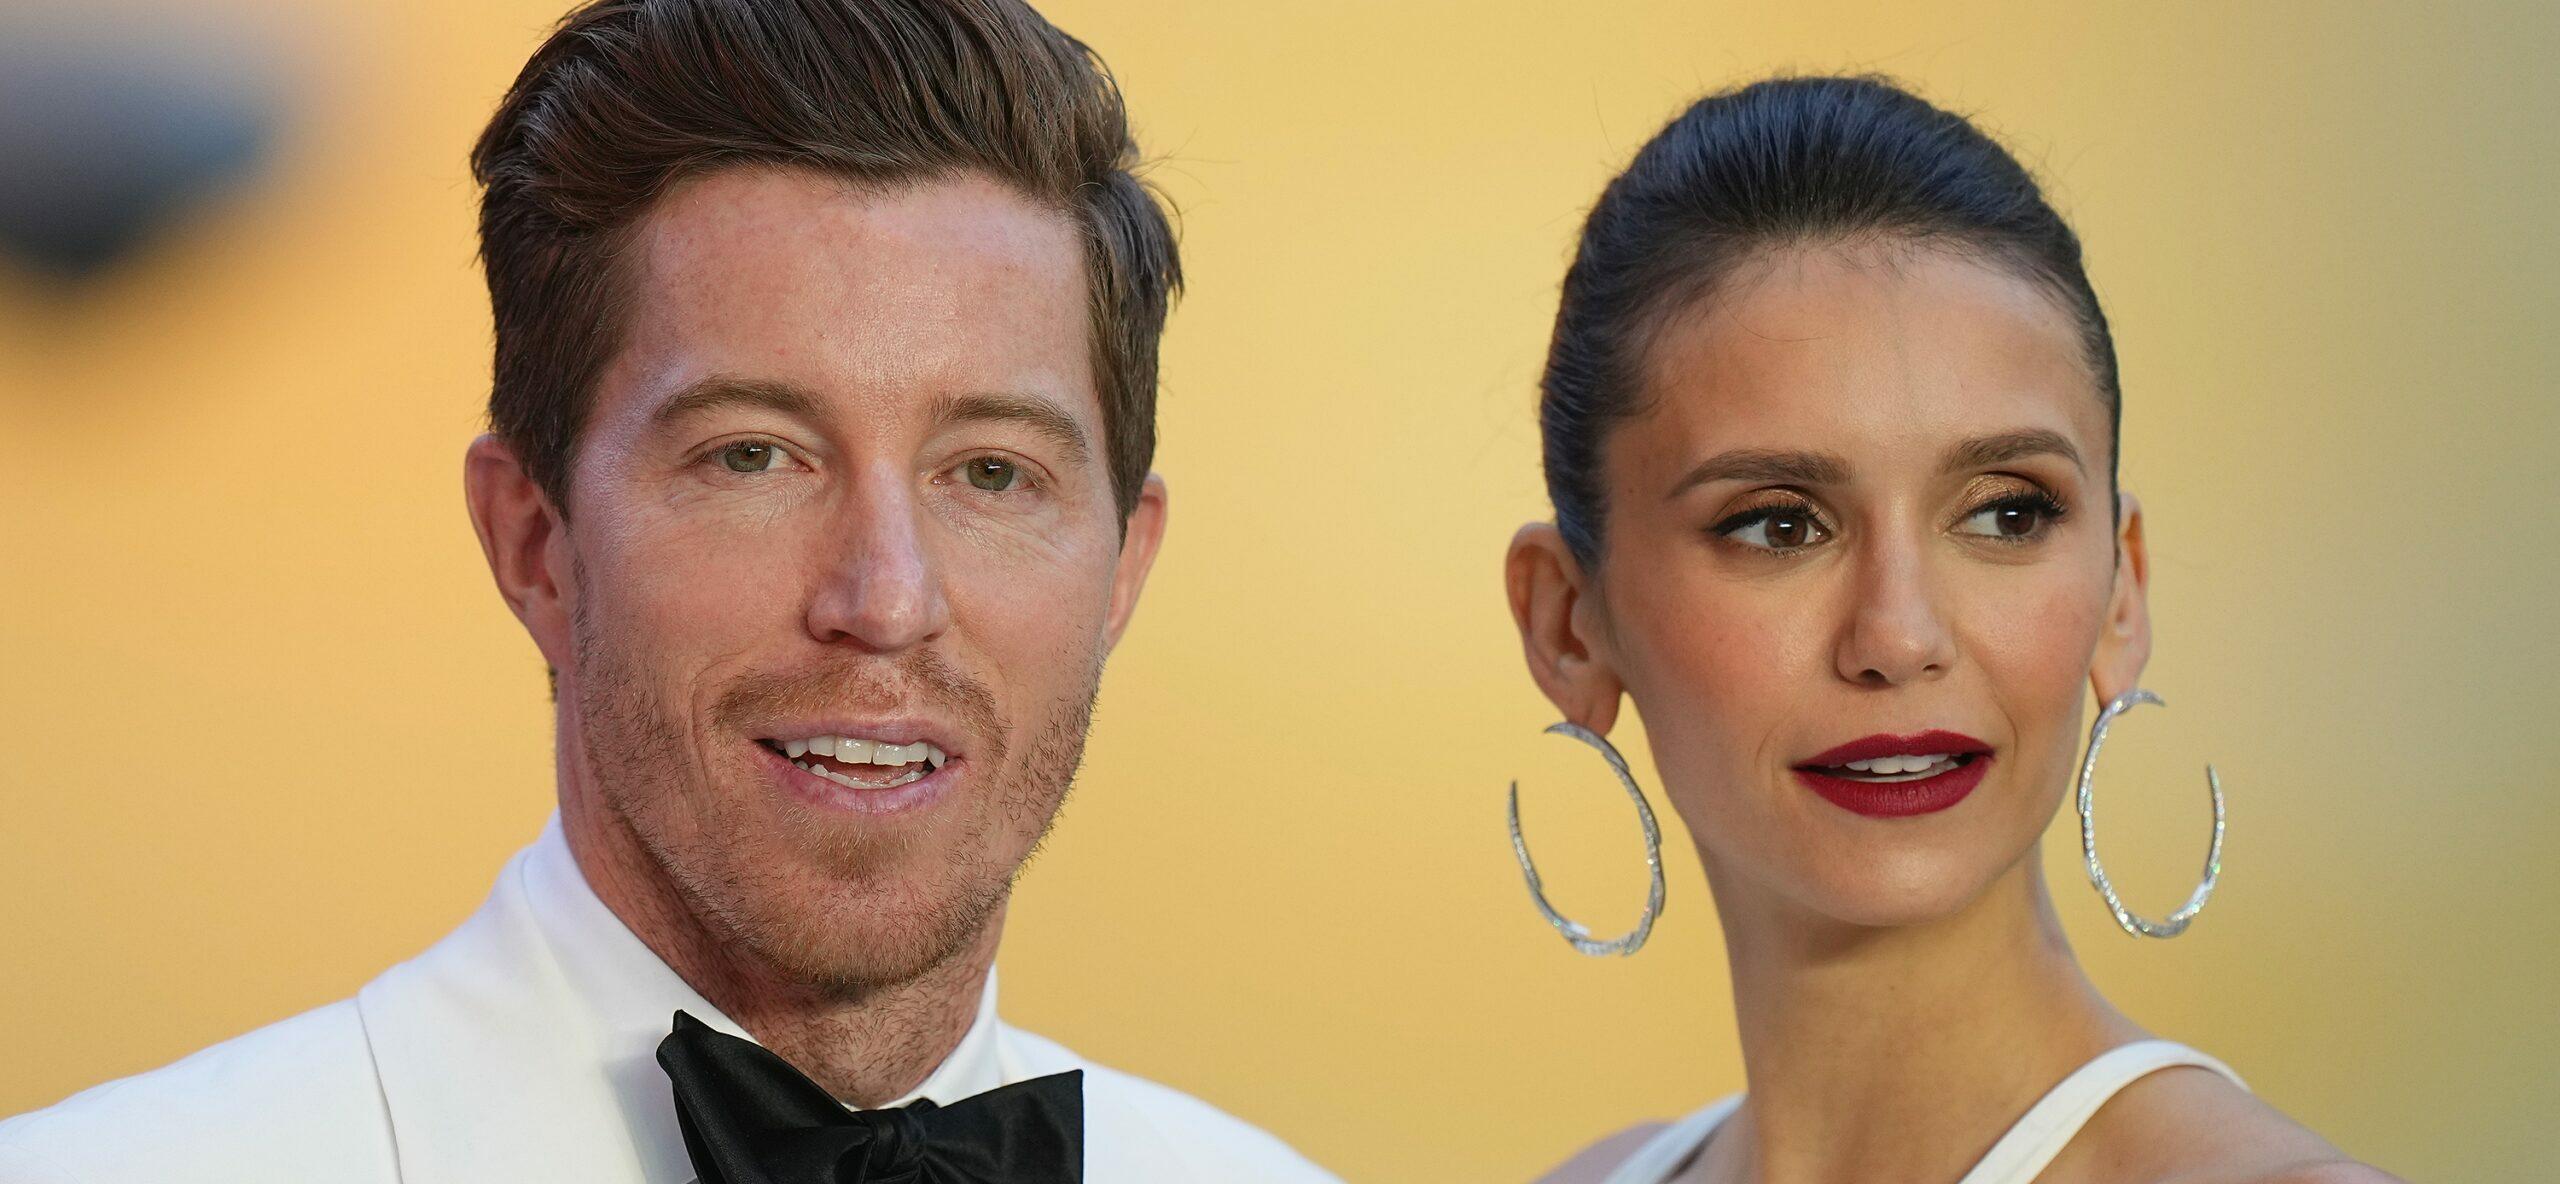 Shaun White Fans Are Certain He's Going to Propose to Nina Dobrev